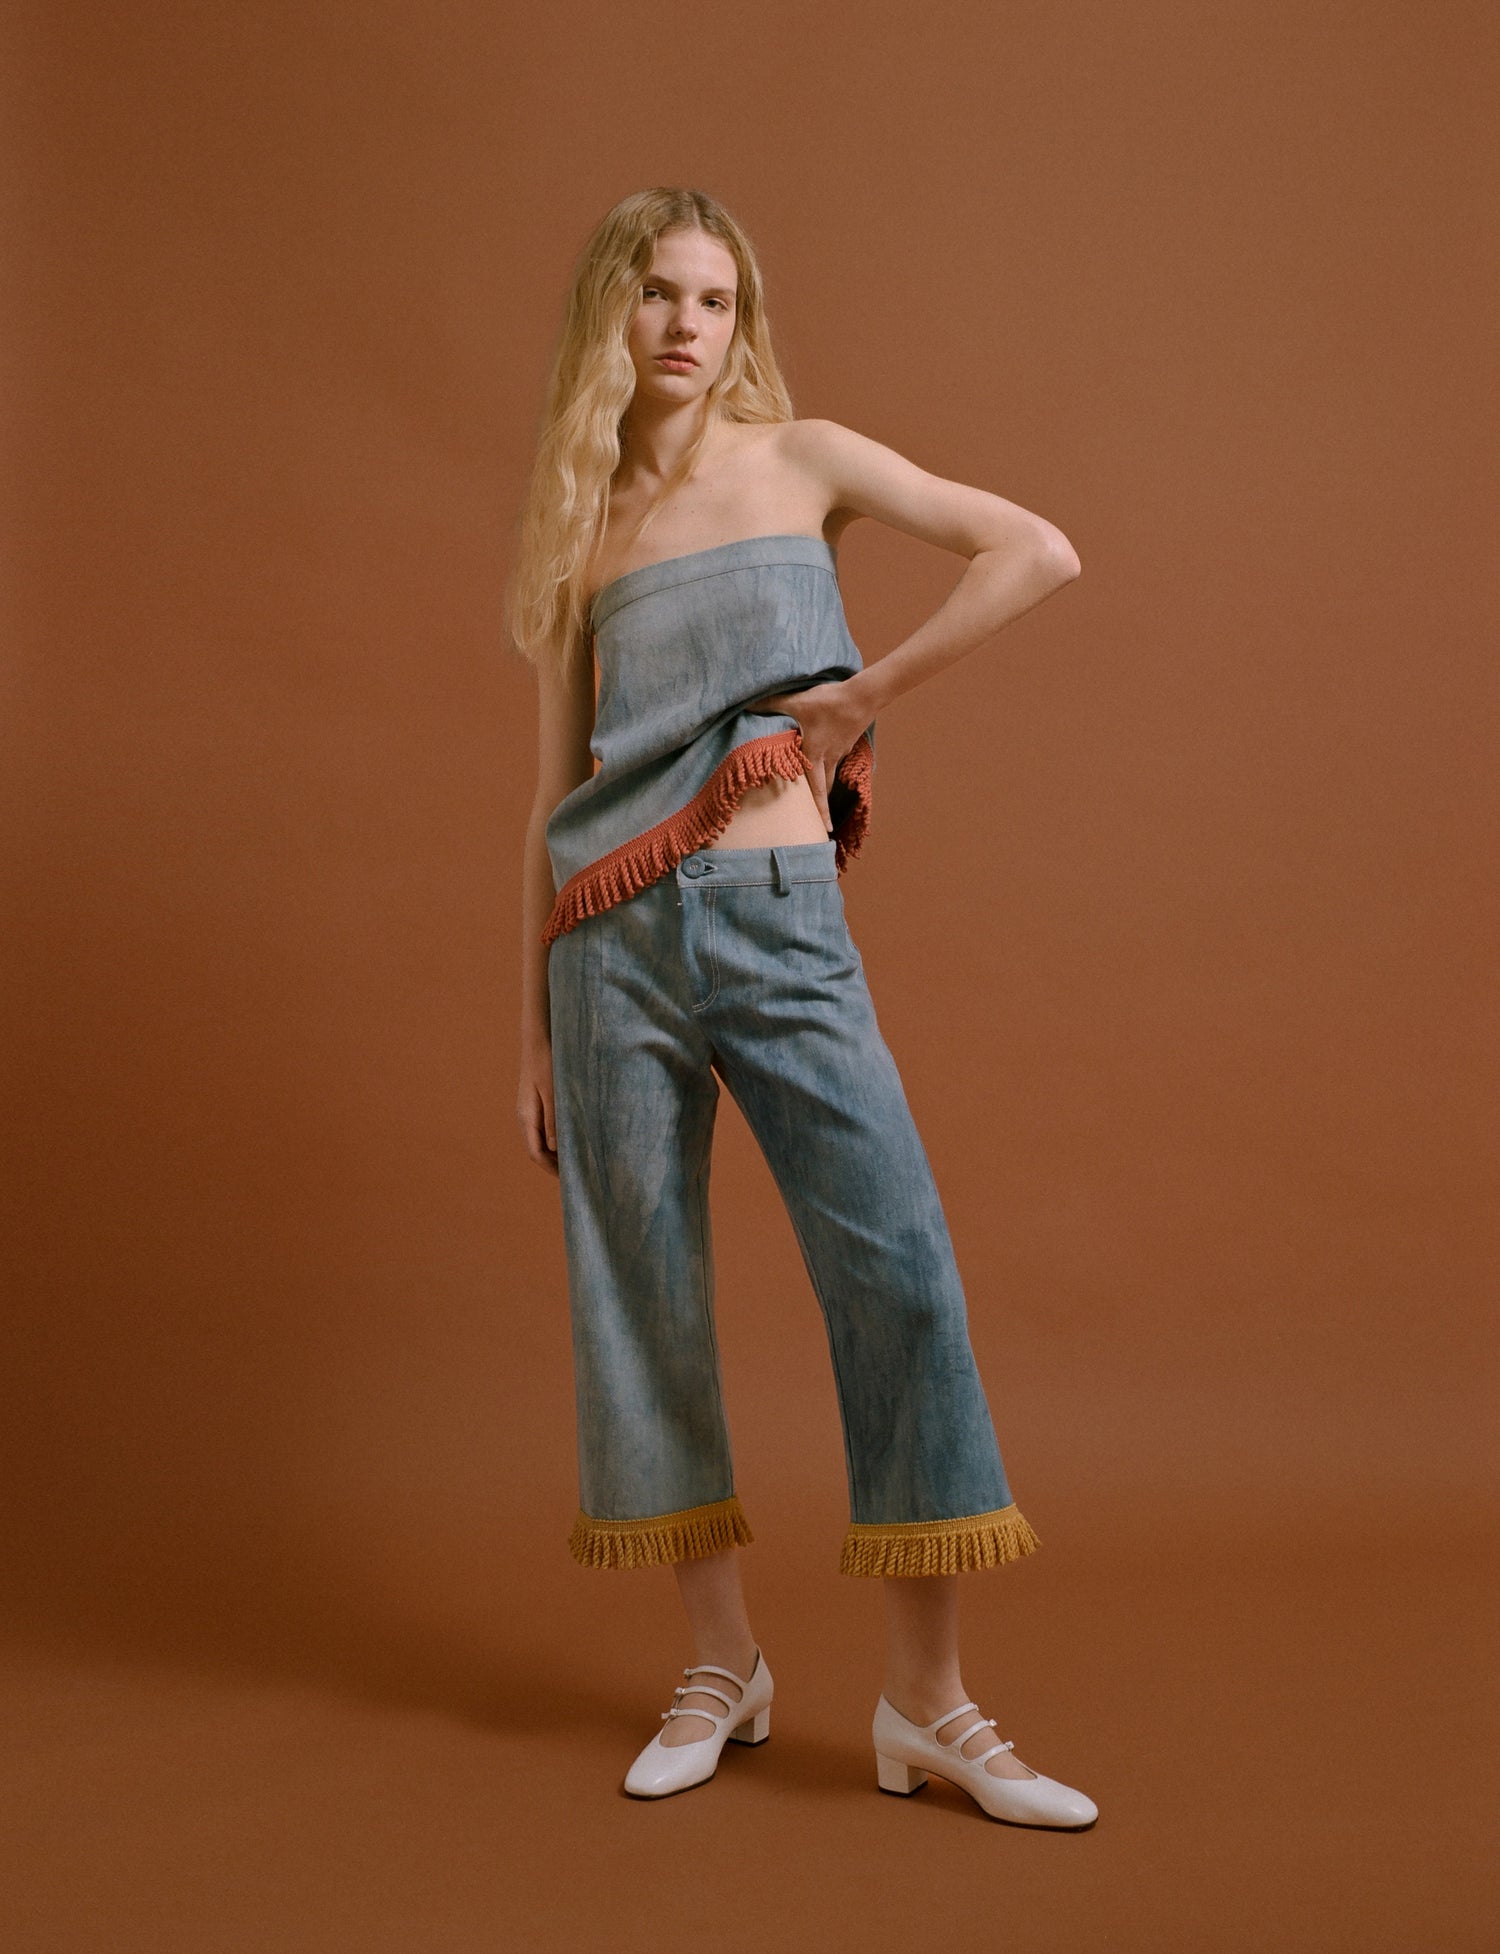 Blonde woman posing with a denim top, yellow embroidered denim pants and white shoes.